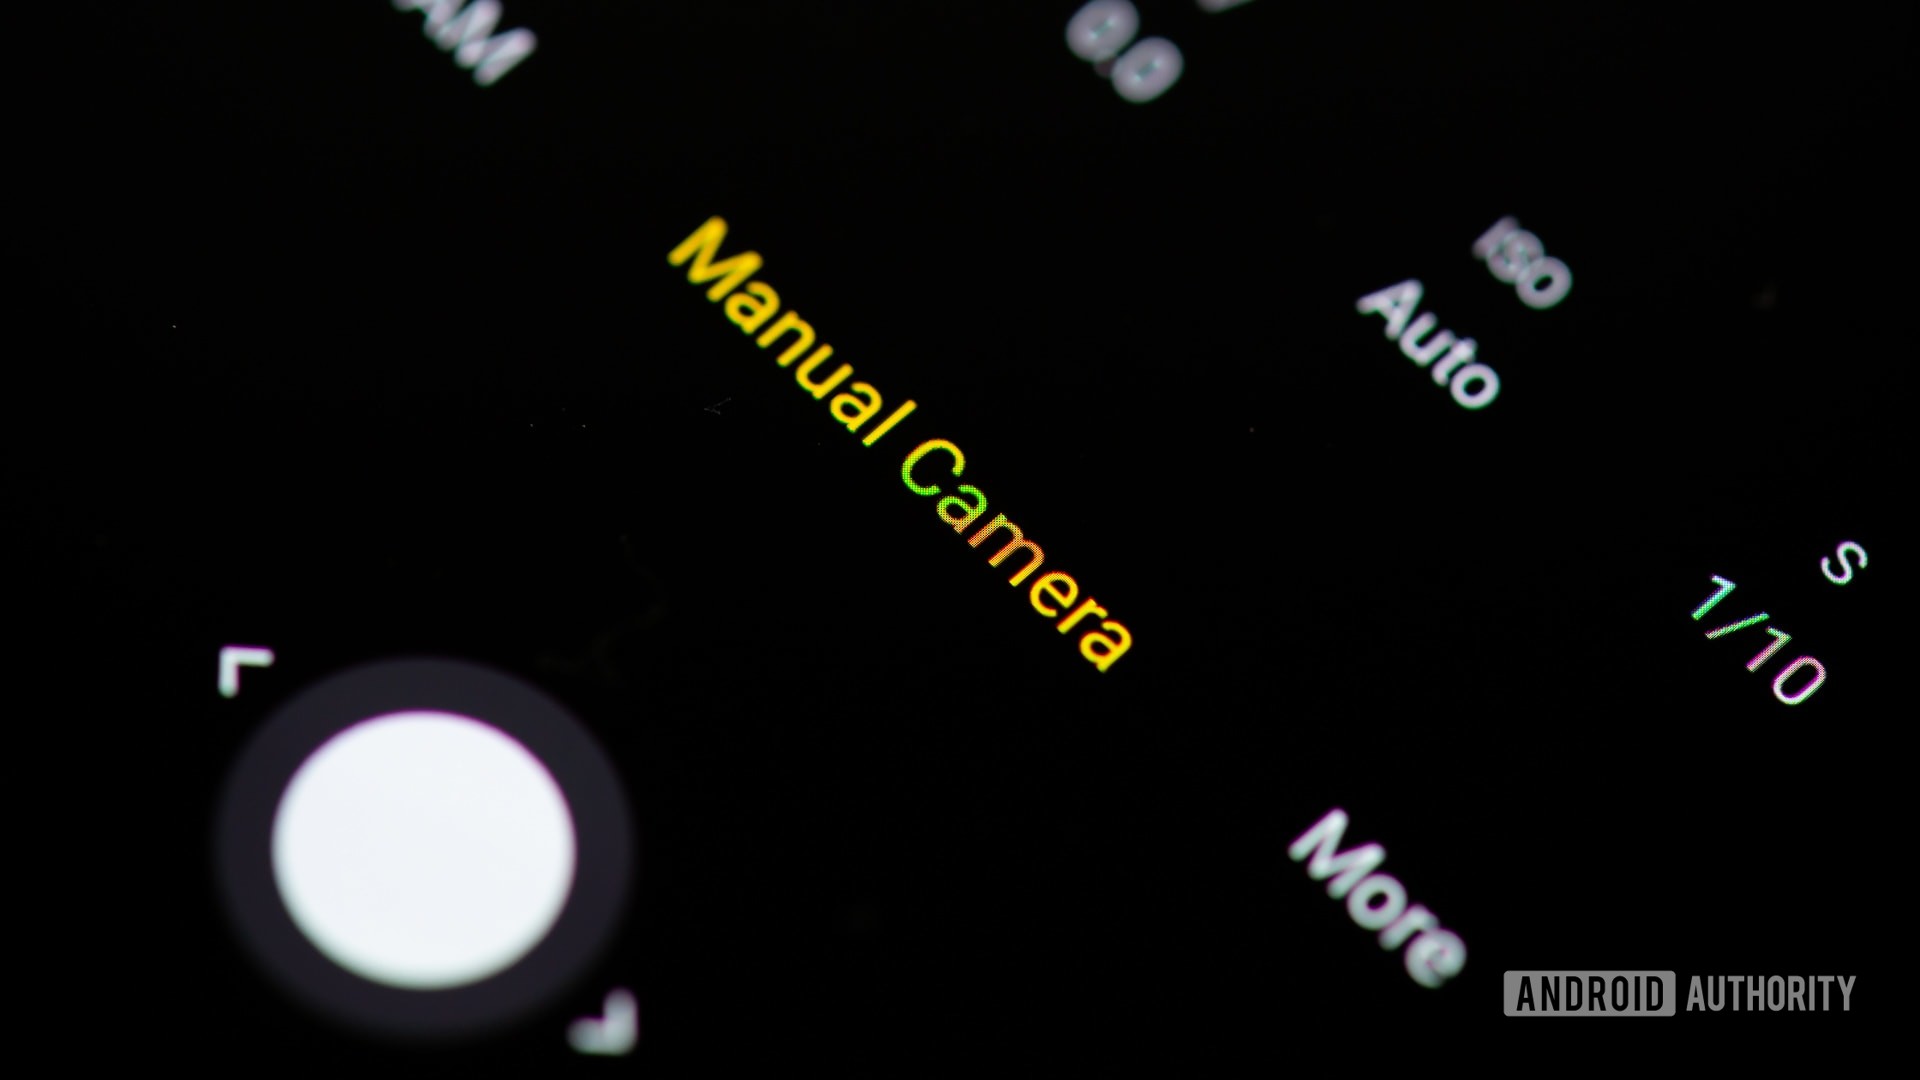 Case adverb Privilege How to use manual mode on your smartphone camera - Android Authority